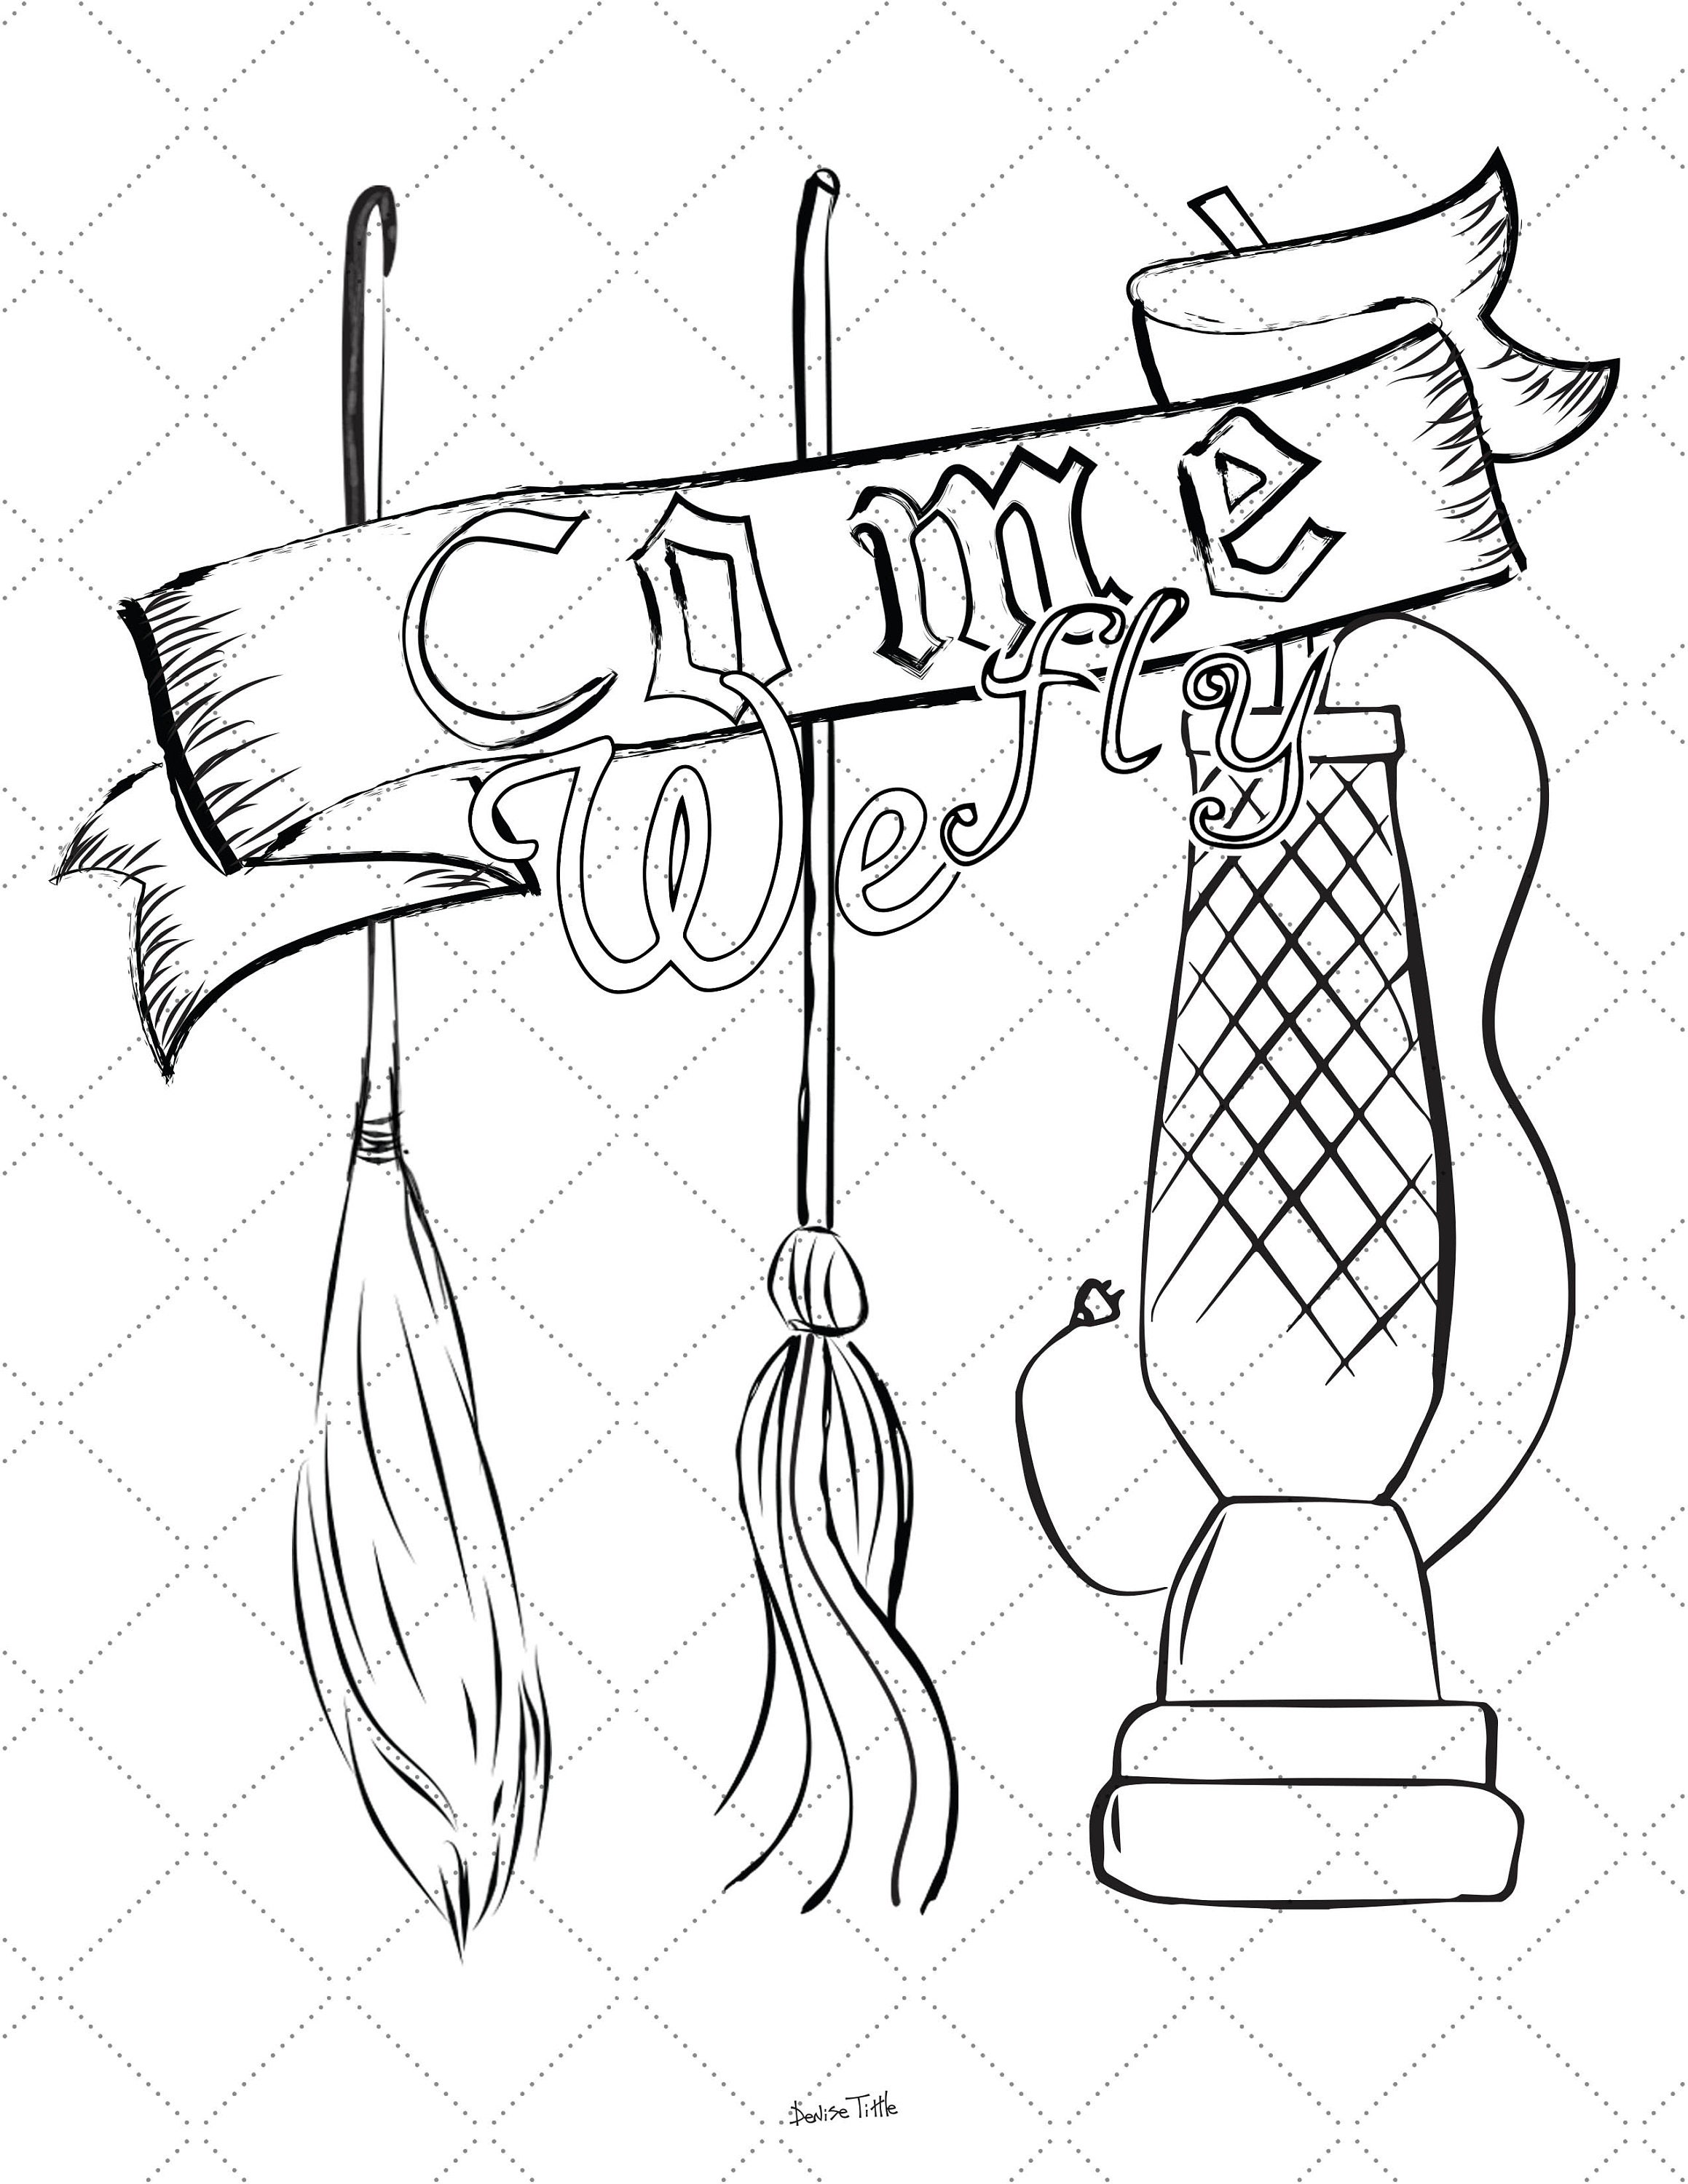 Come We Fly Hocus Pocus Coloring Page by Denise Tittle Artwork | Etsy